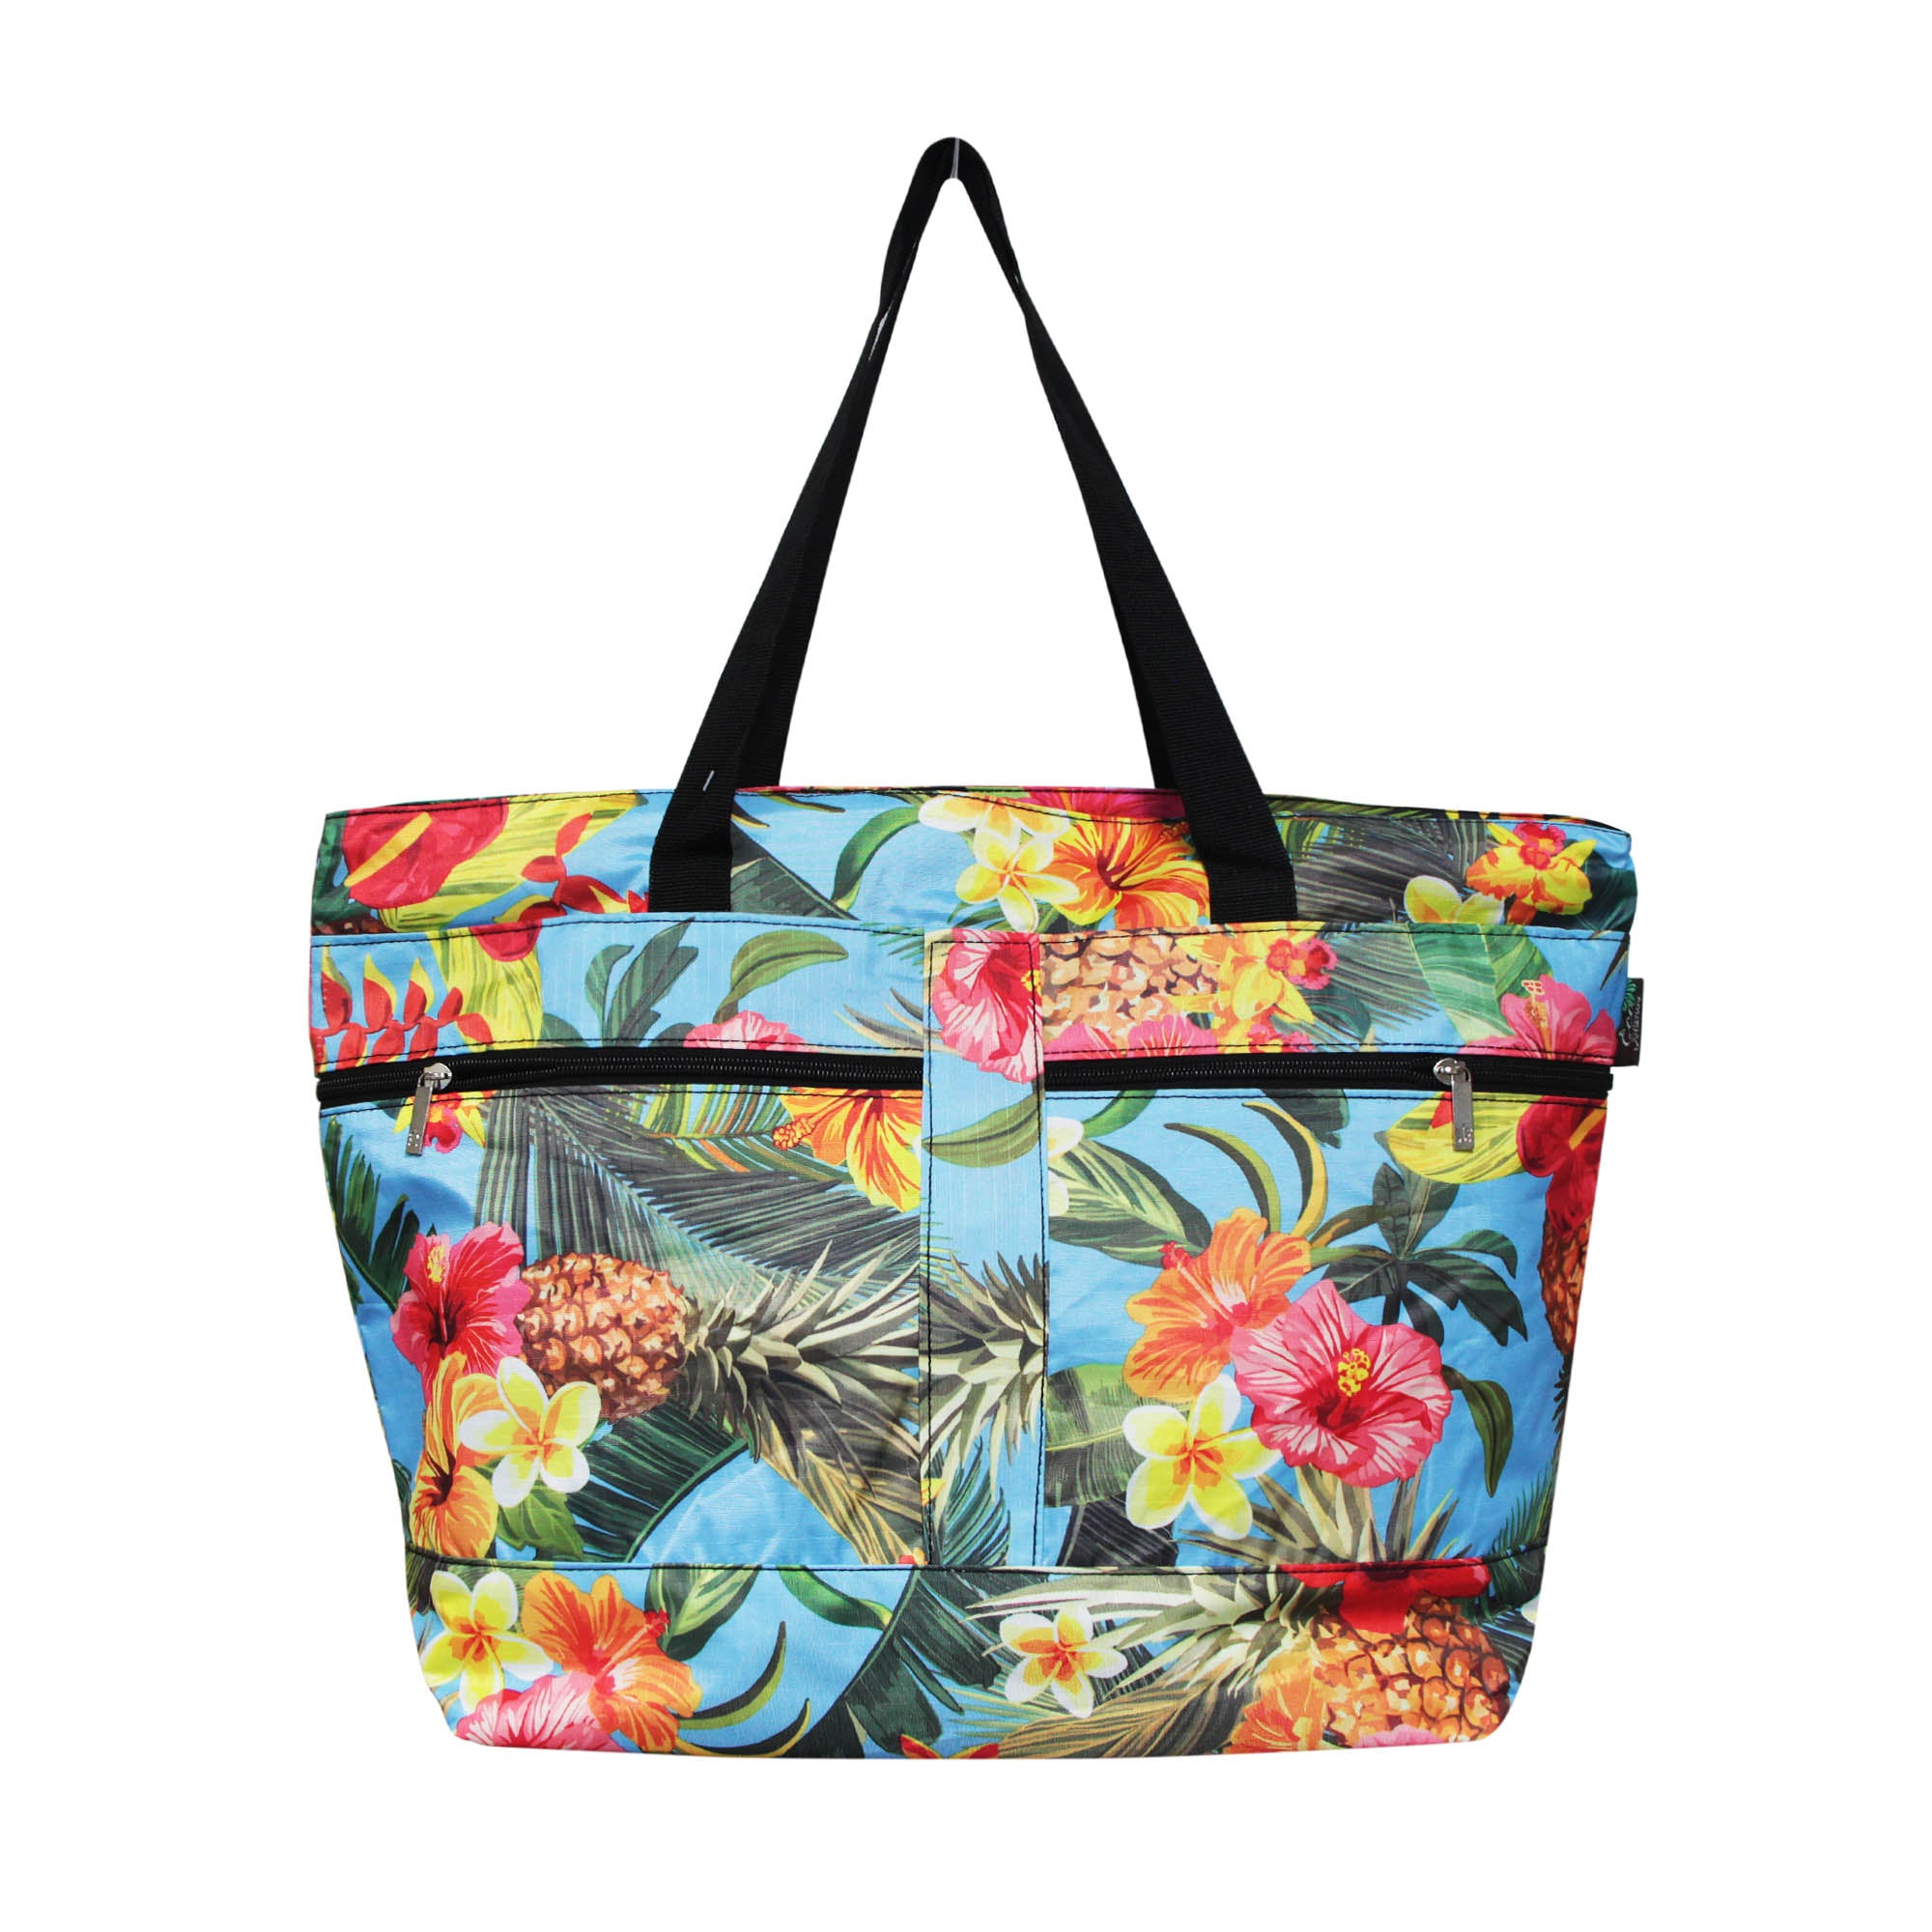 IKEA *NEW DESIGN* MEDIUM LEAF TOTE BAG LAUNDRY BEACH GROCERIES TROPICAL  TRIBAL *SAME DAY SHIPPING*